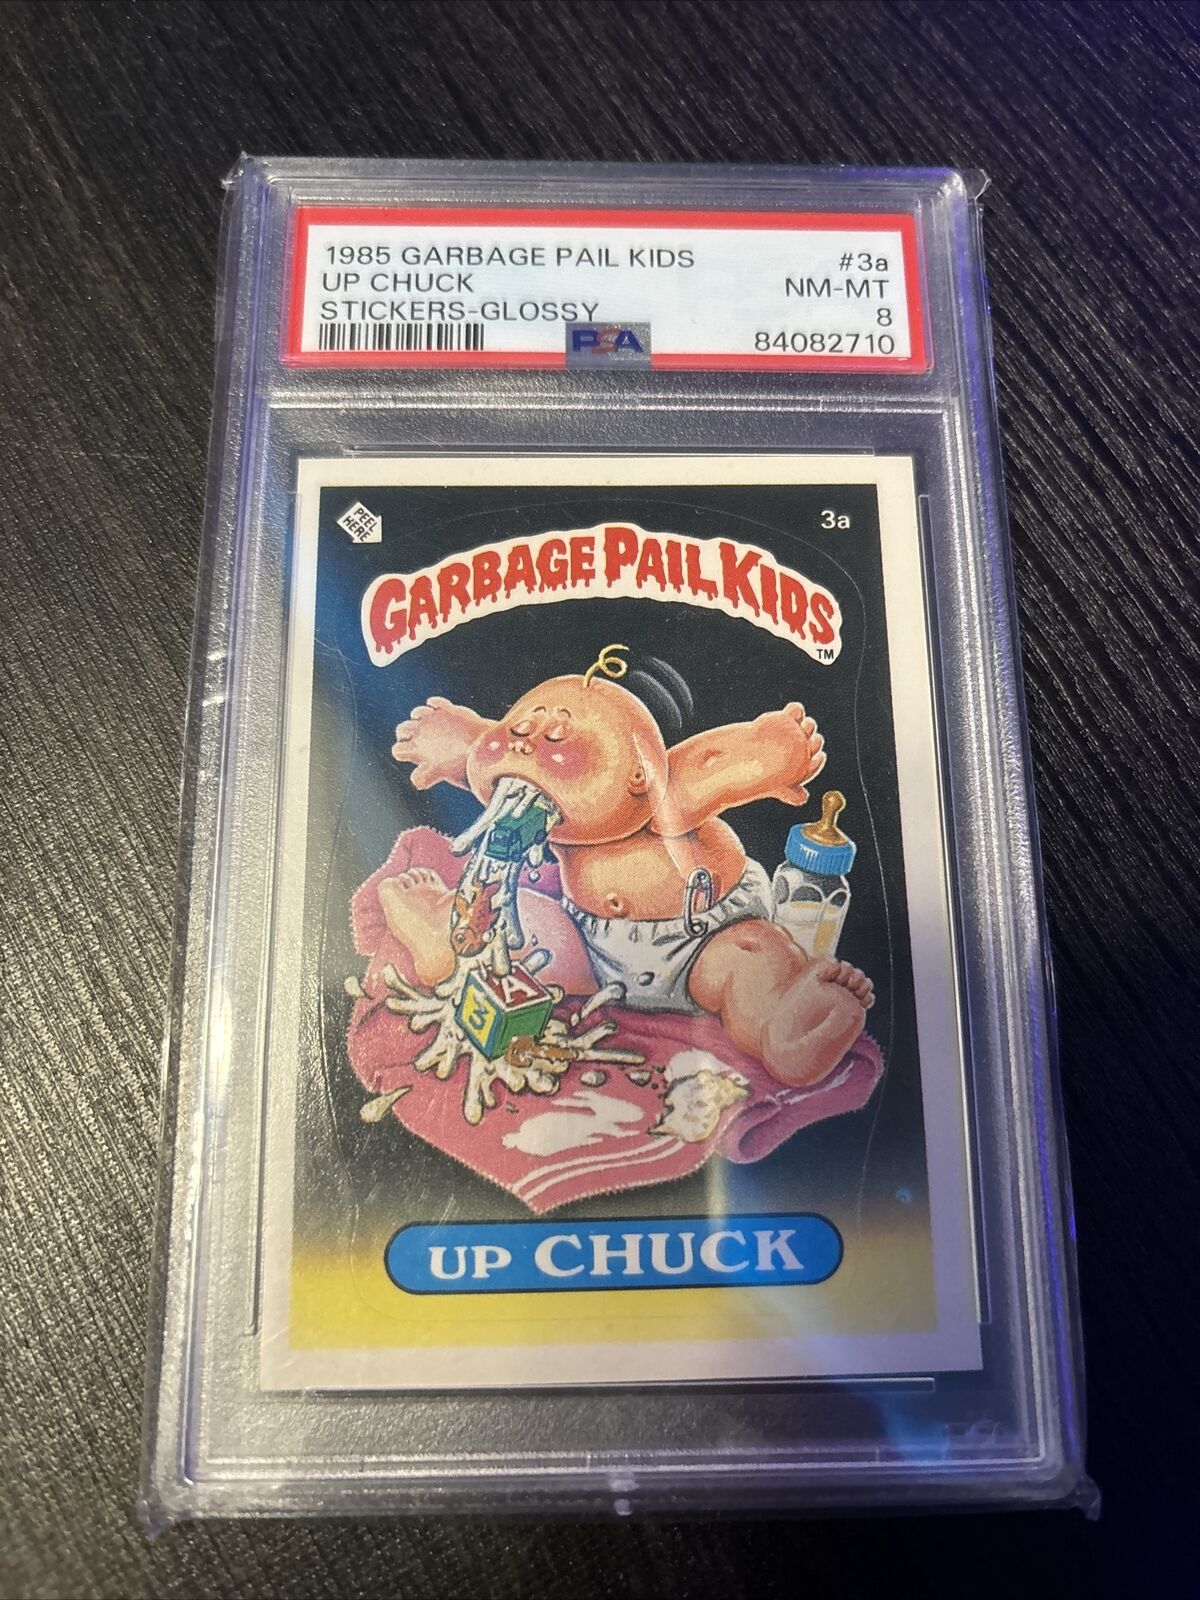 1985 Topps Garbage Pail Kids Stickers Glossy Up Chuck #3a PSA 8